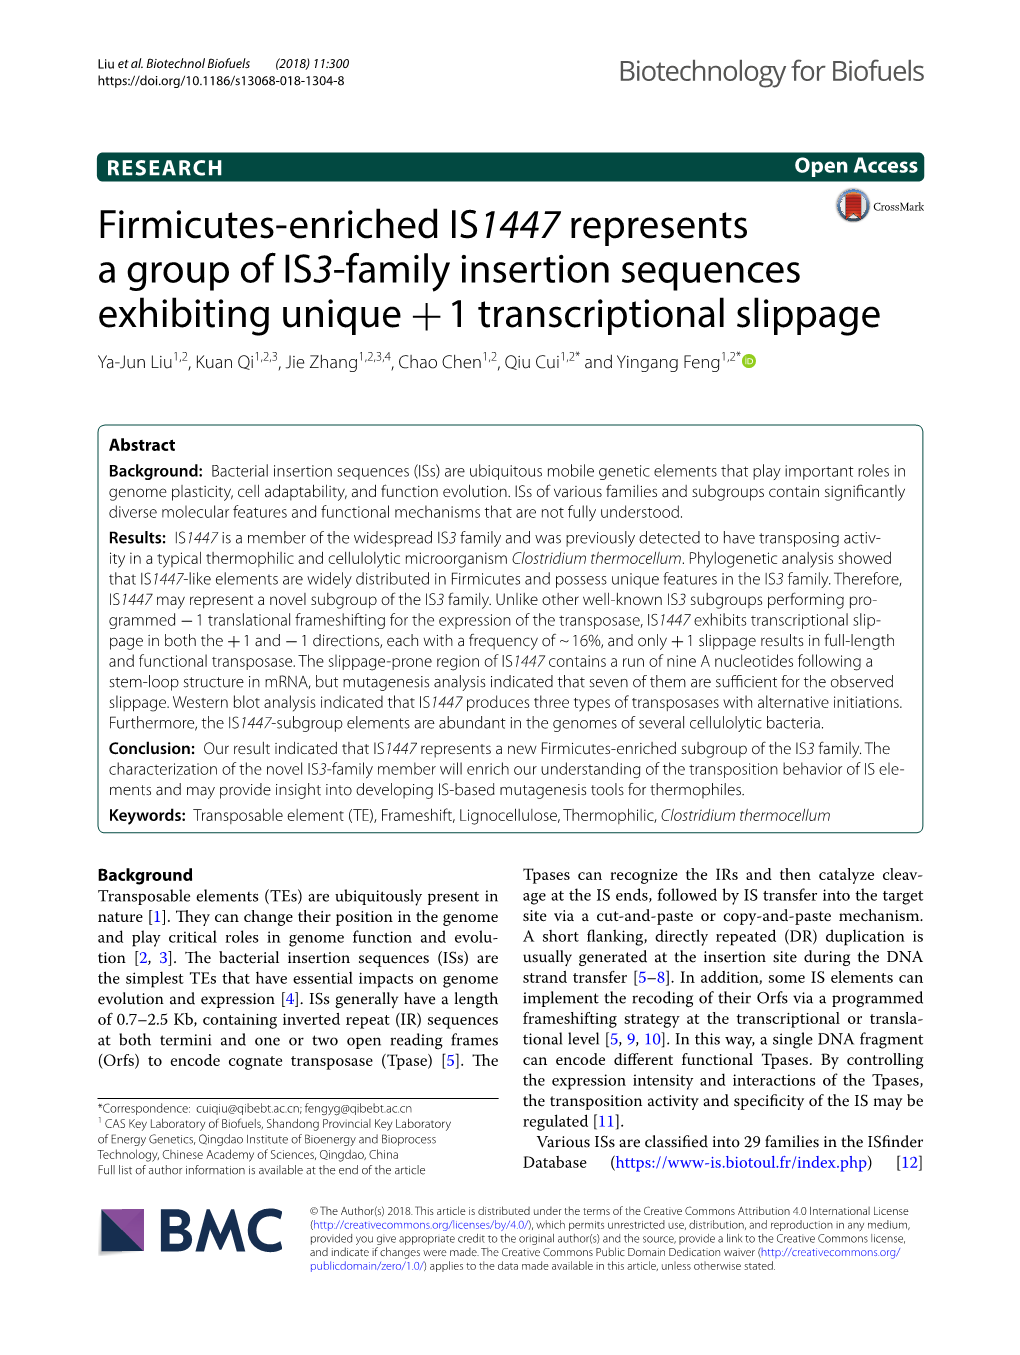 Firmicutes-Enriched IS1447 Represents a Group of IS3-Family